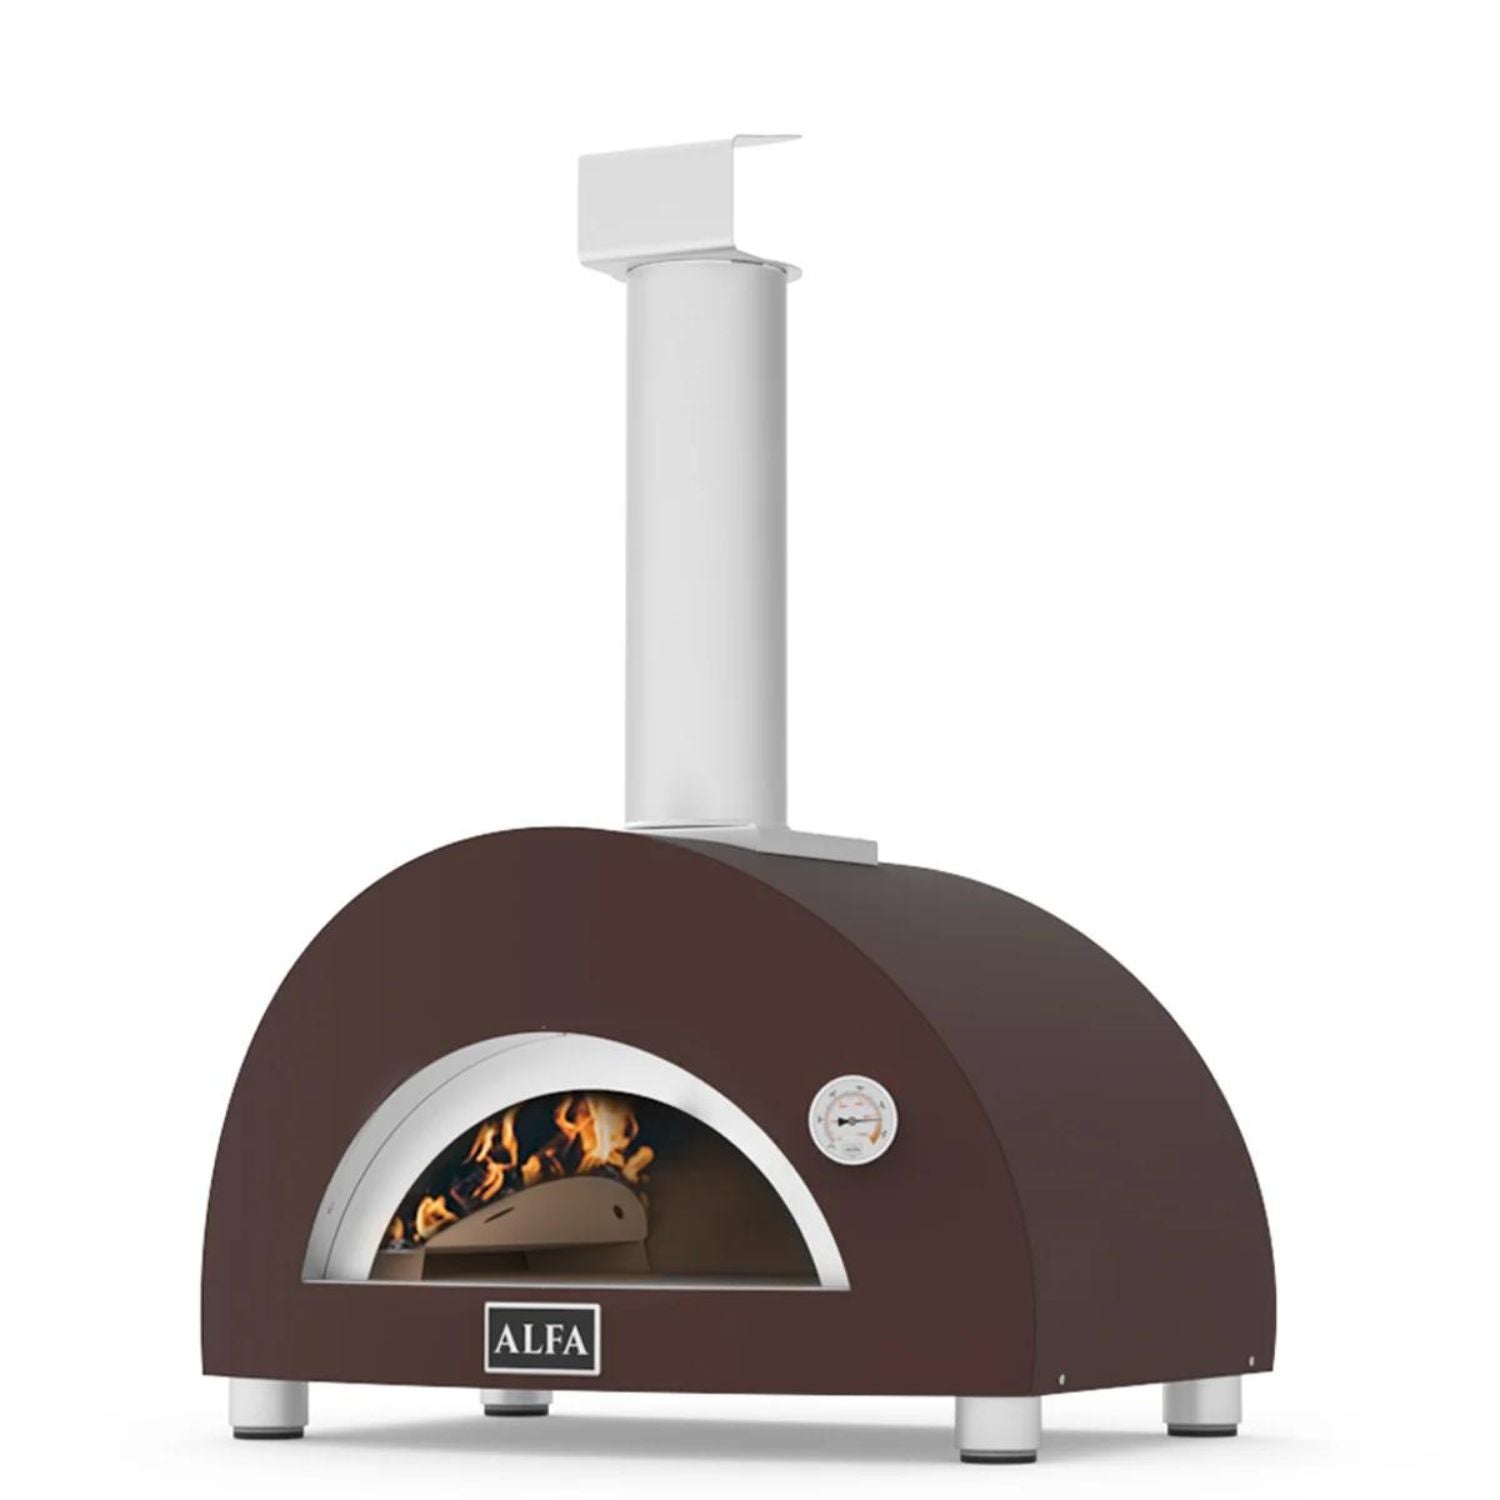 Alfa Moderno One Wood Fired Pizza Oven, Copper 12042684